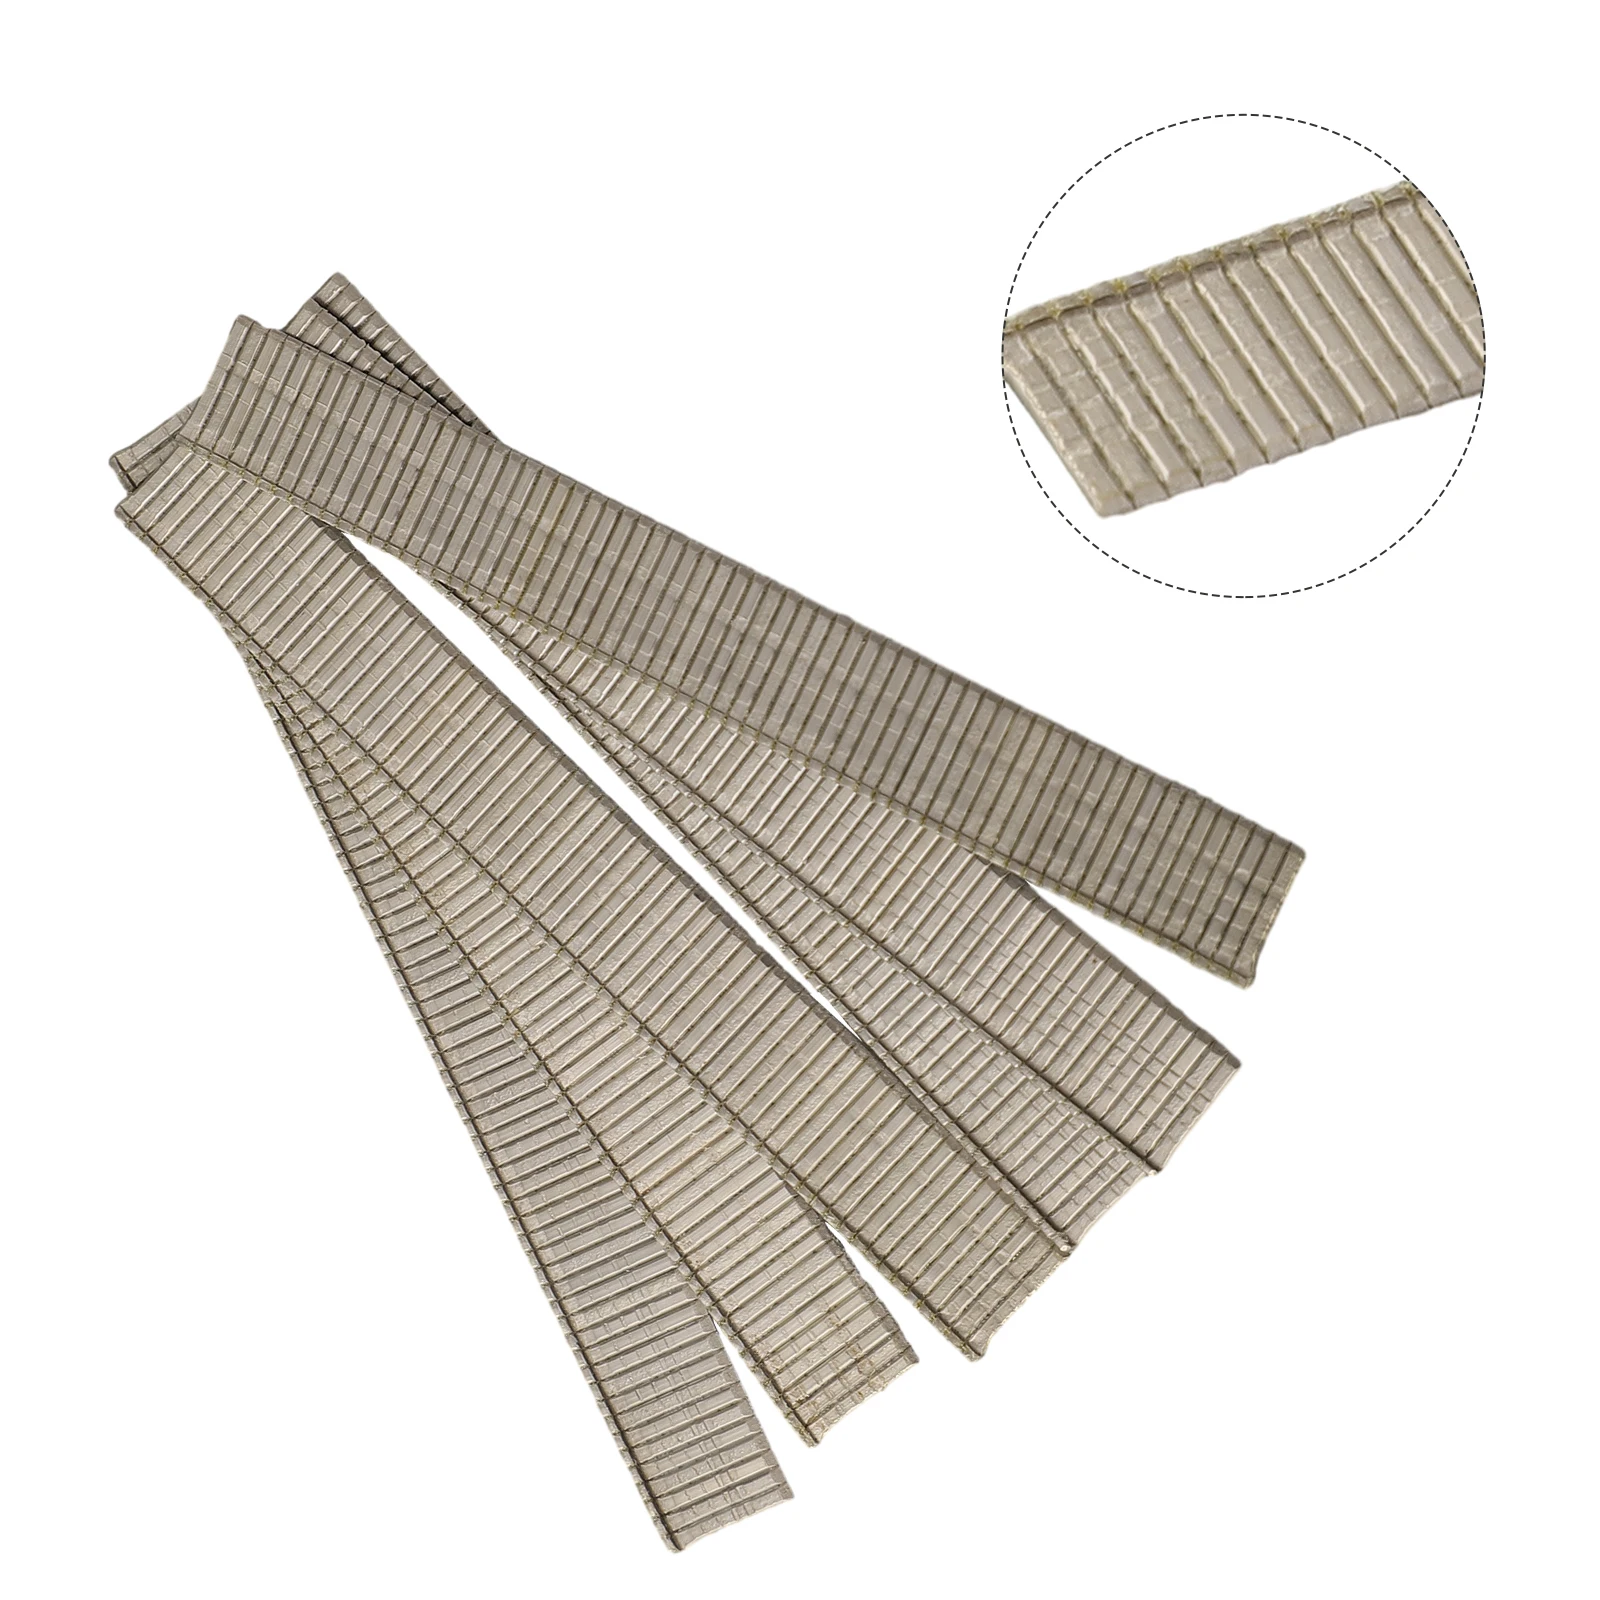 

Brad Nails Staple Accessories Spare Parts 1105pcs Woodworking F15/F20/F25/F30 For DIY Home/Gardening Kit Stainless Steel